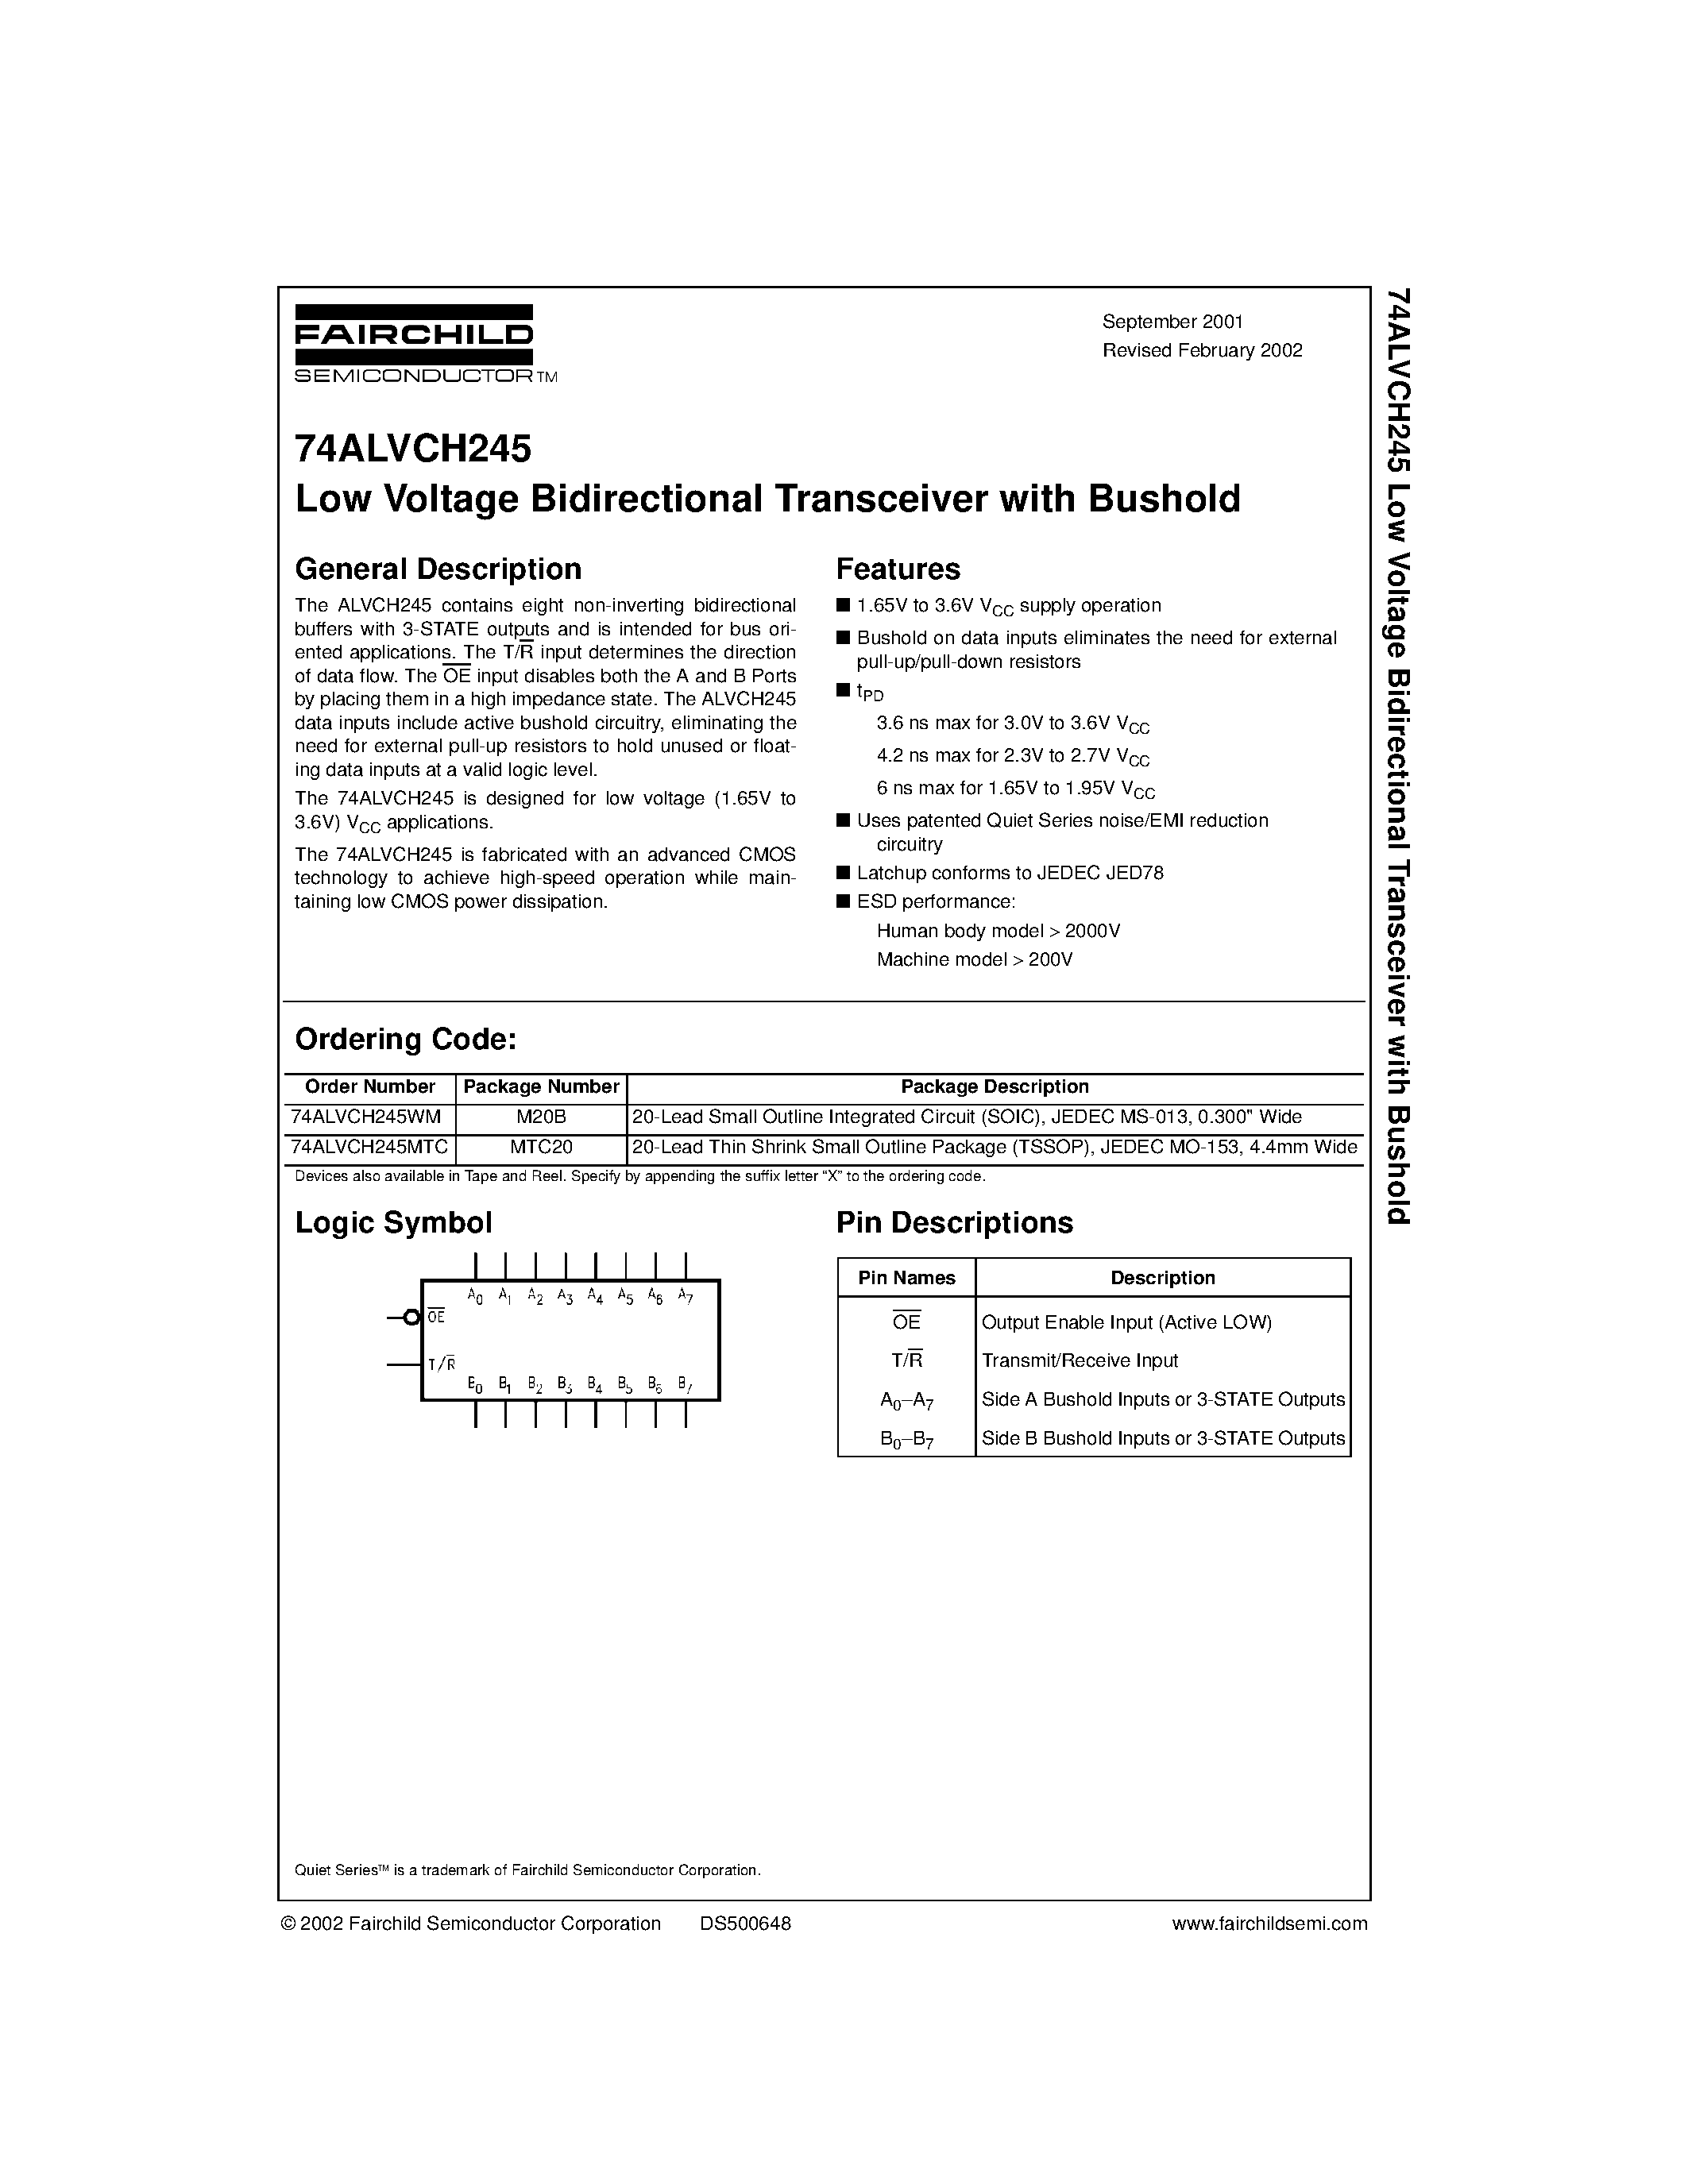 Datasheet 74ALVCH245MTC - Low Voltage Bidirectional Transceiver with Bushold page 1